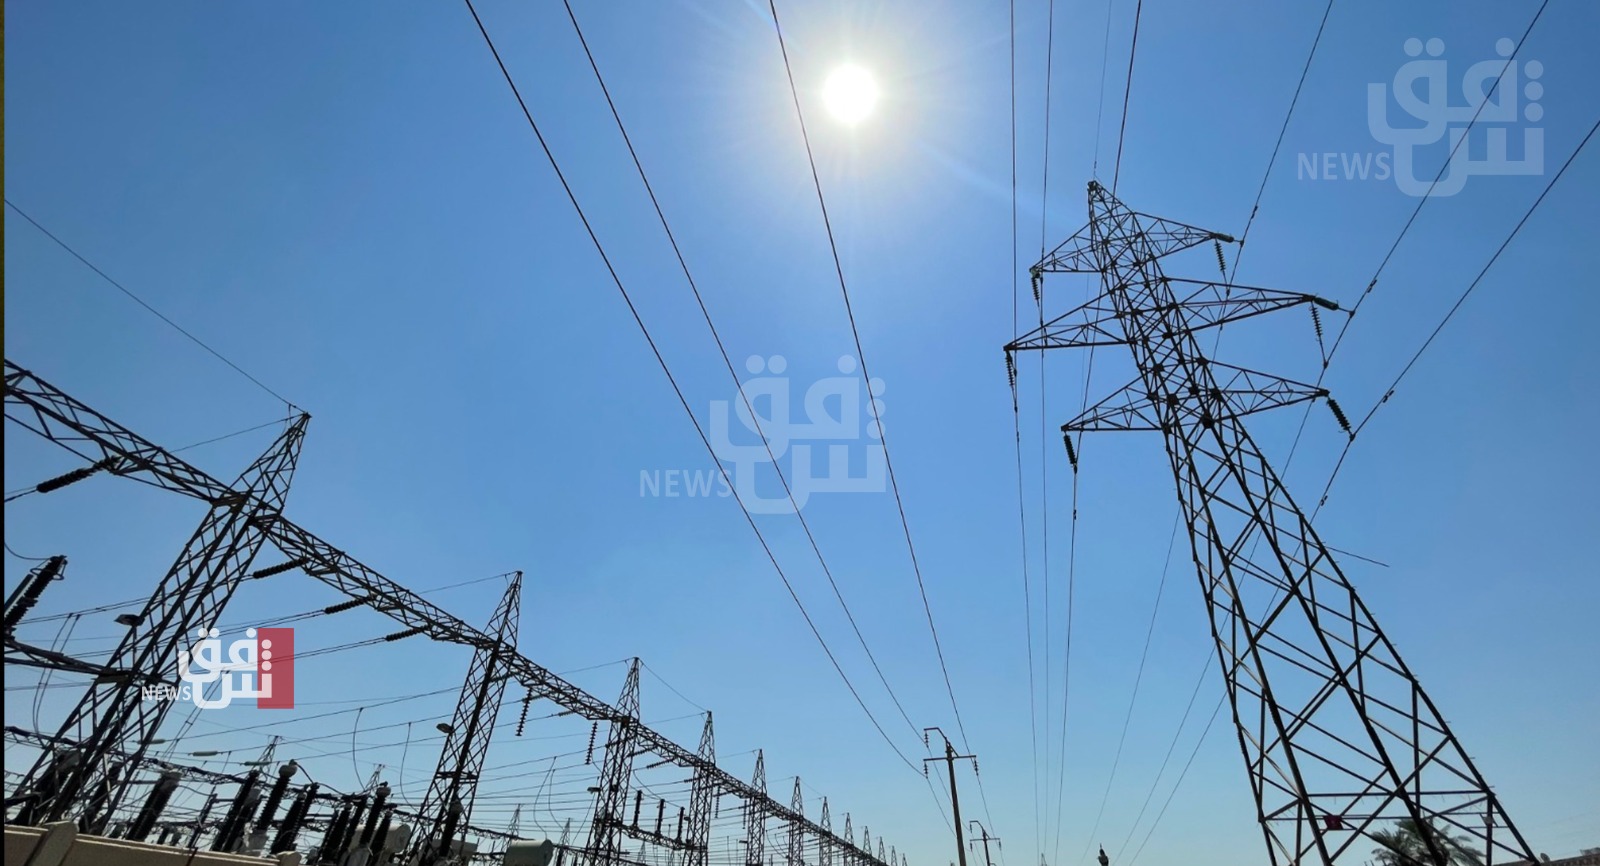 KRG restores electricity after technical outage